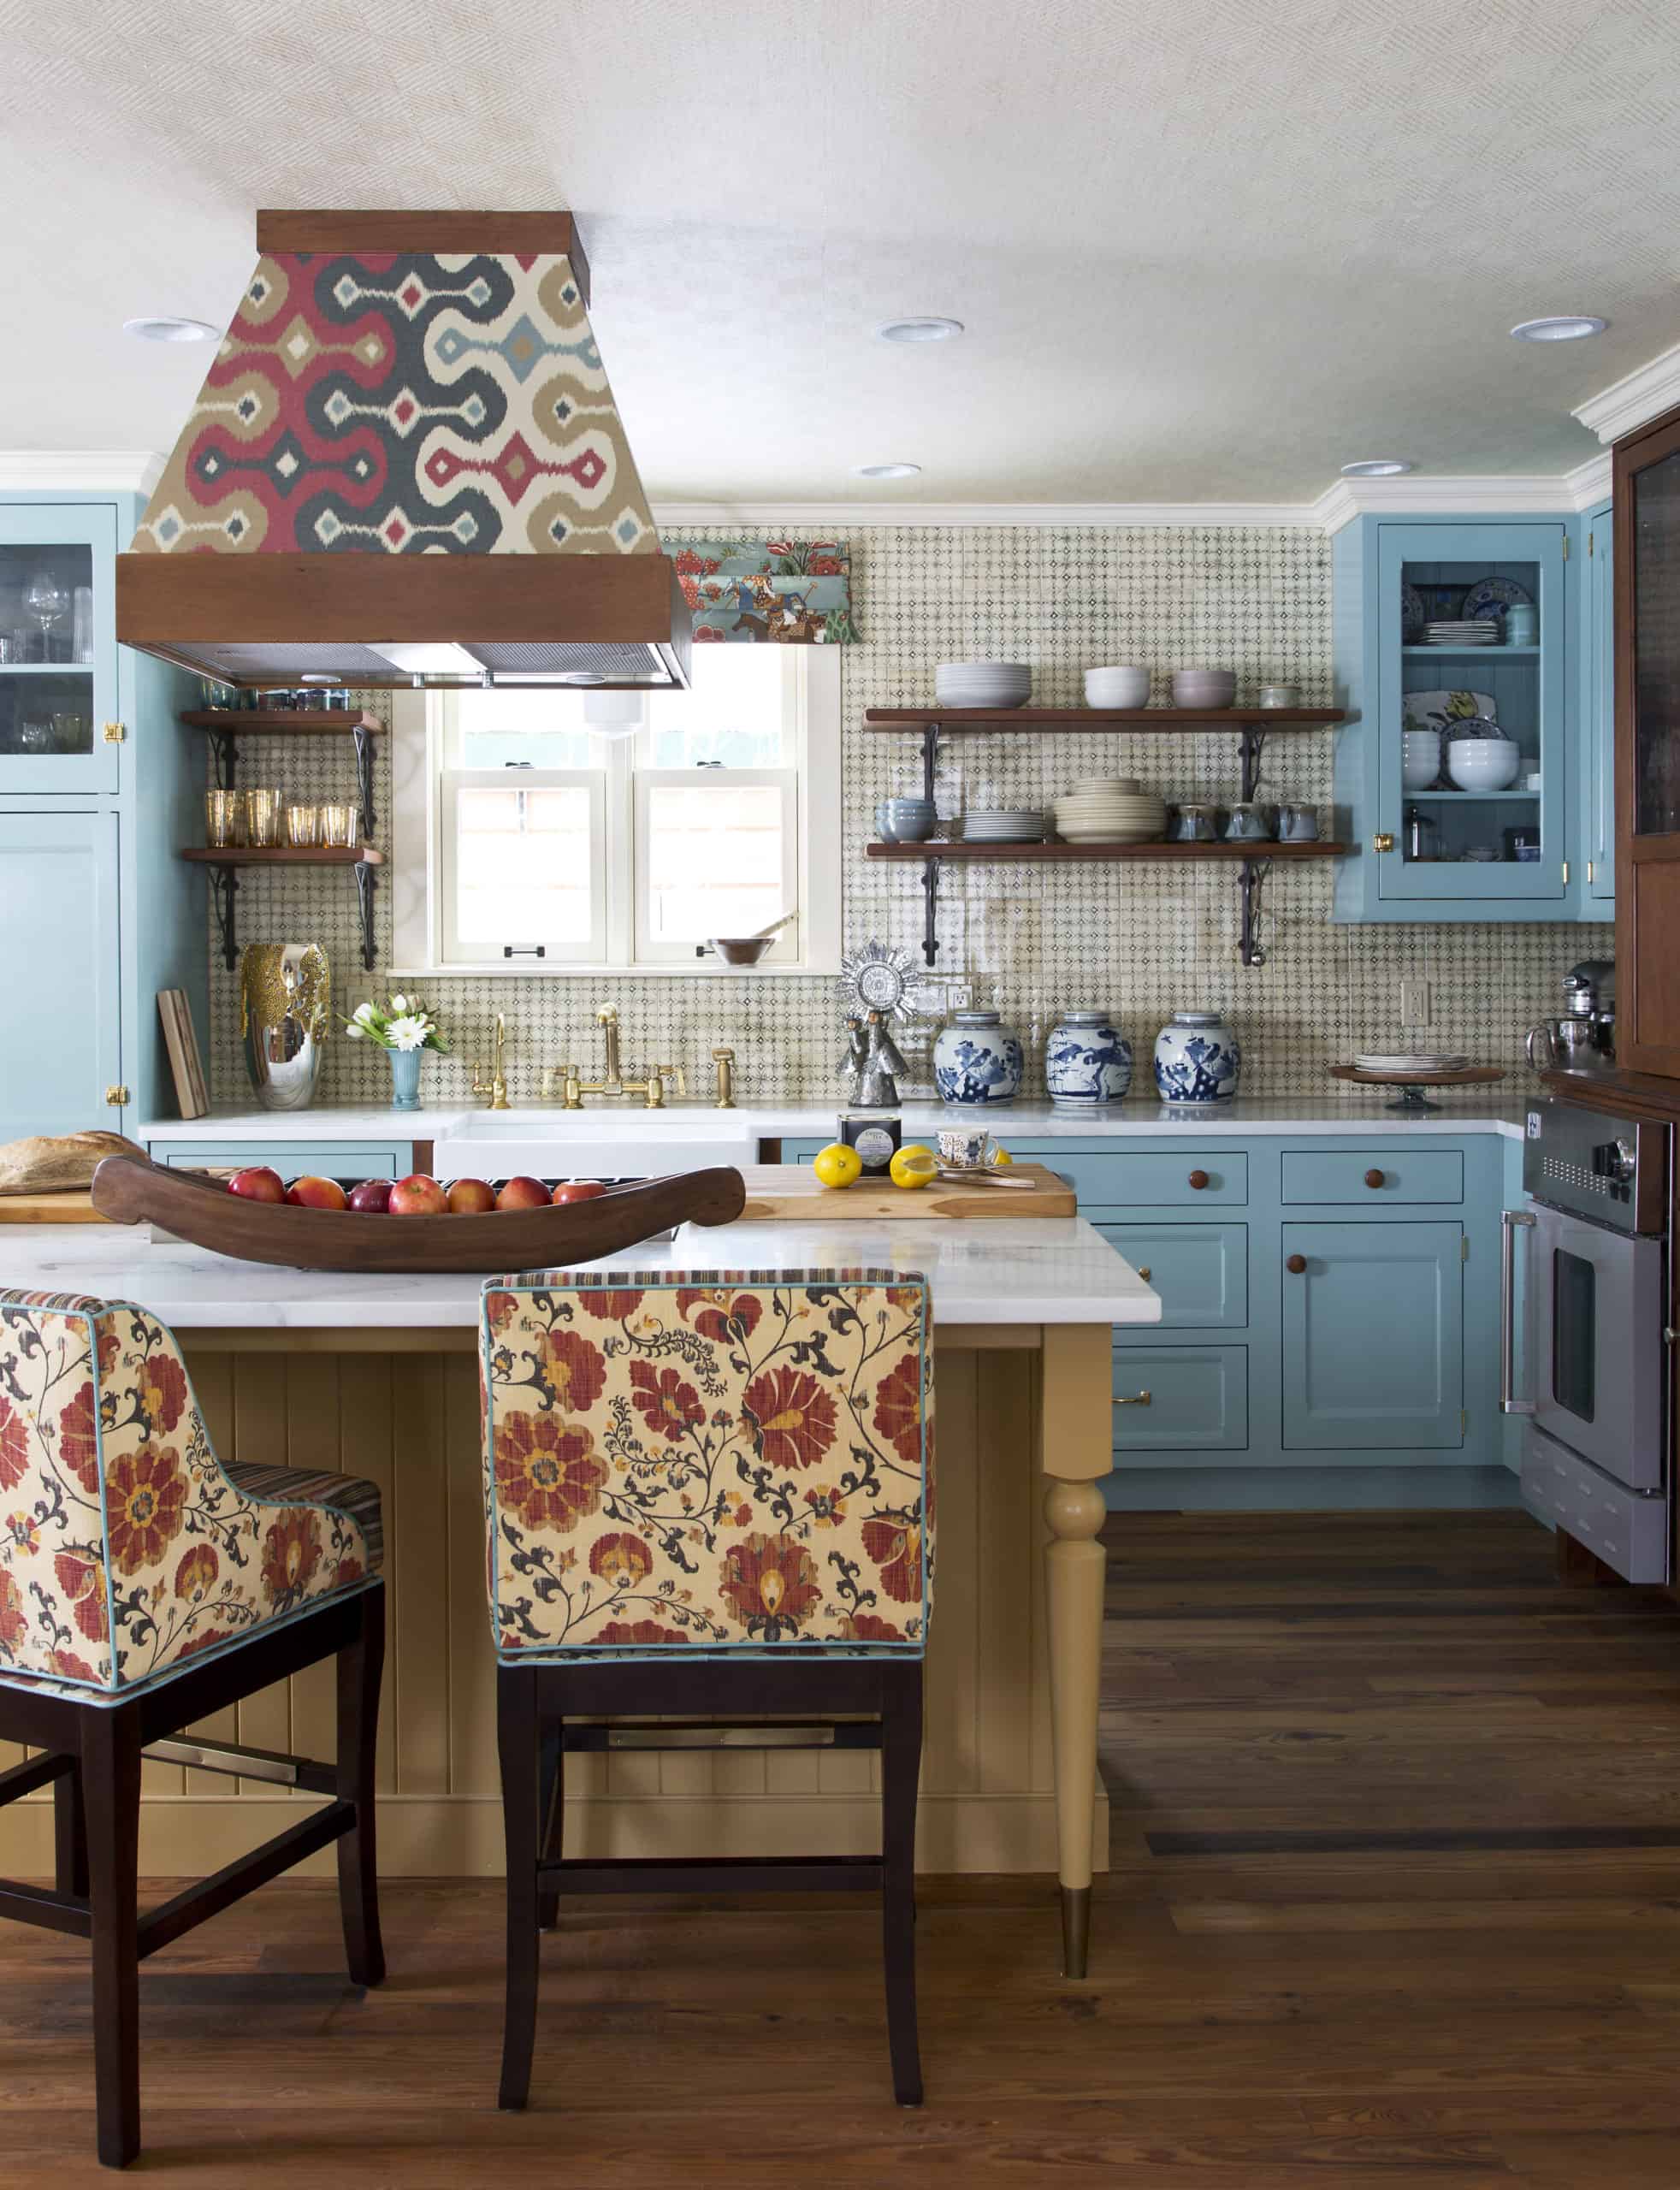 Wallpapered stove hood, open kitchen shelving in rustic contemporary kitchen